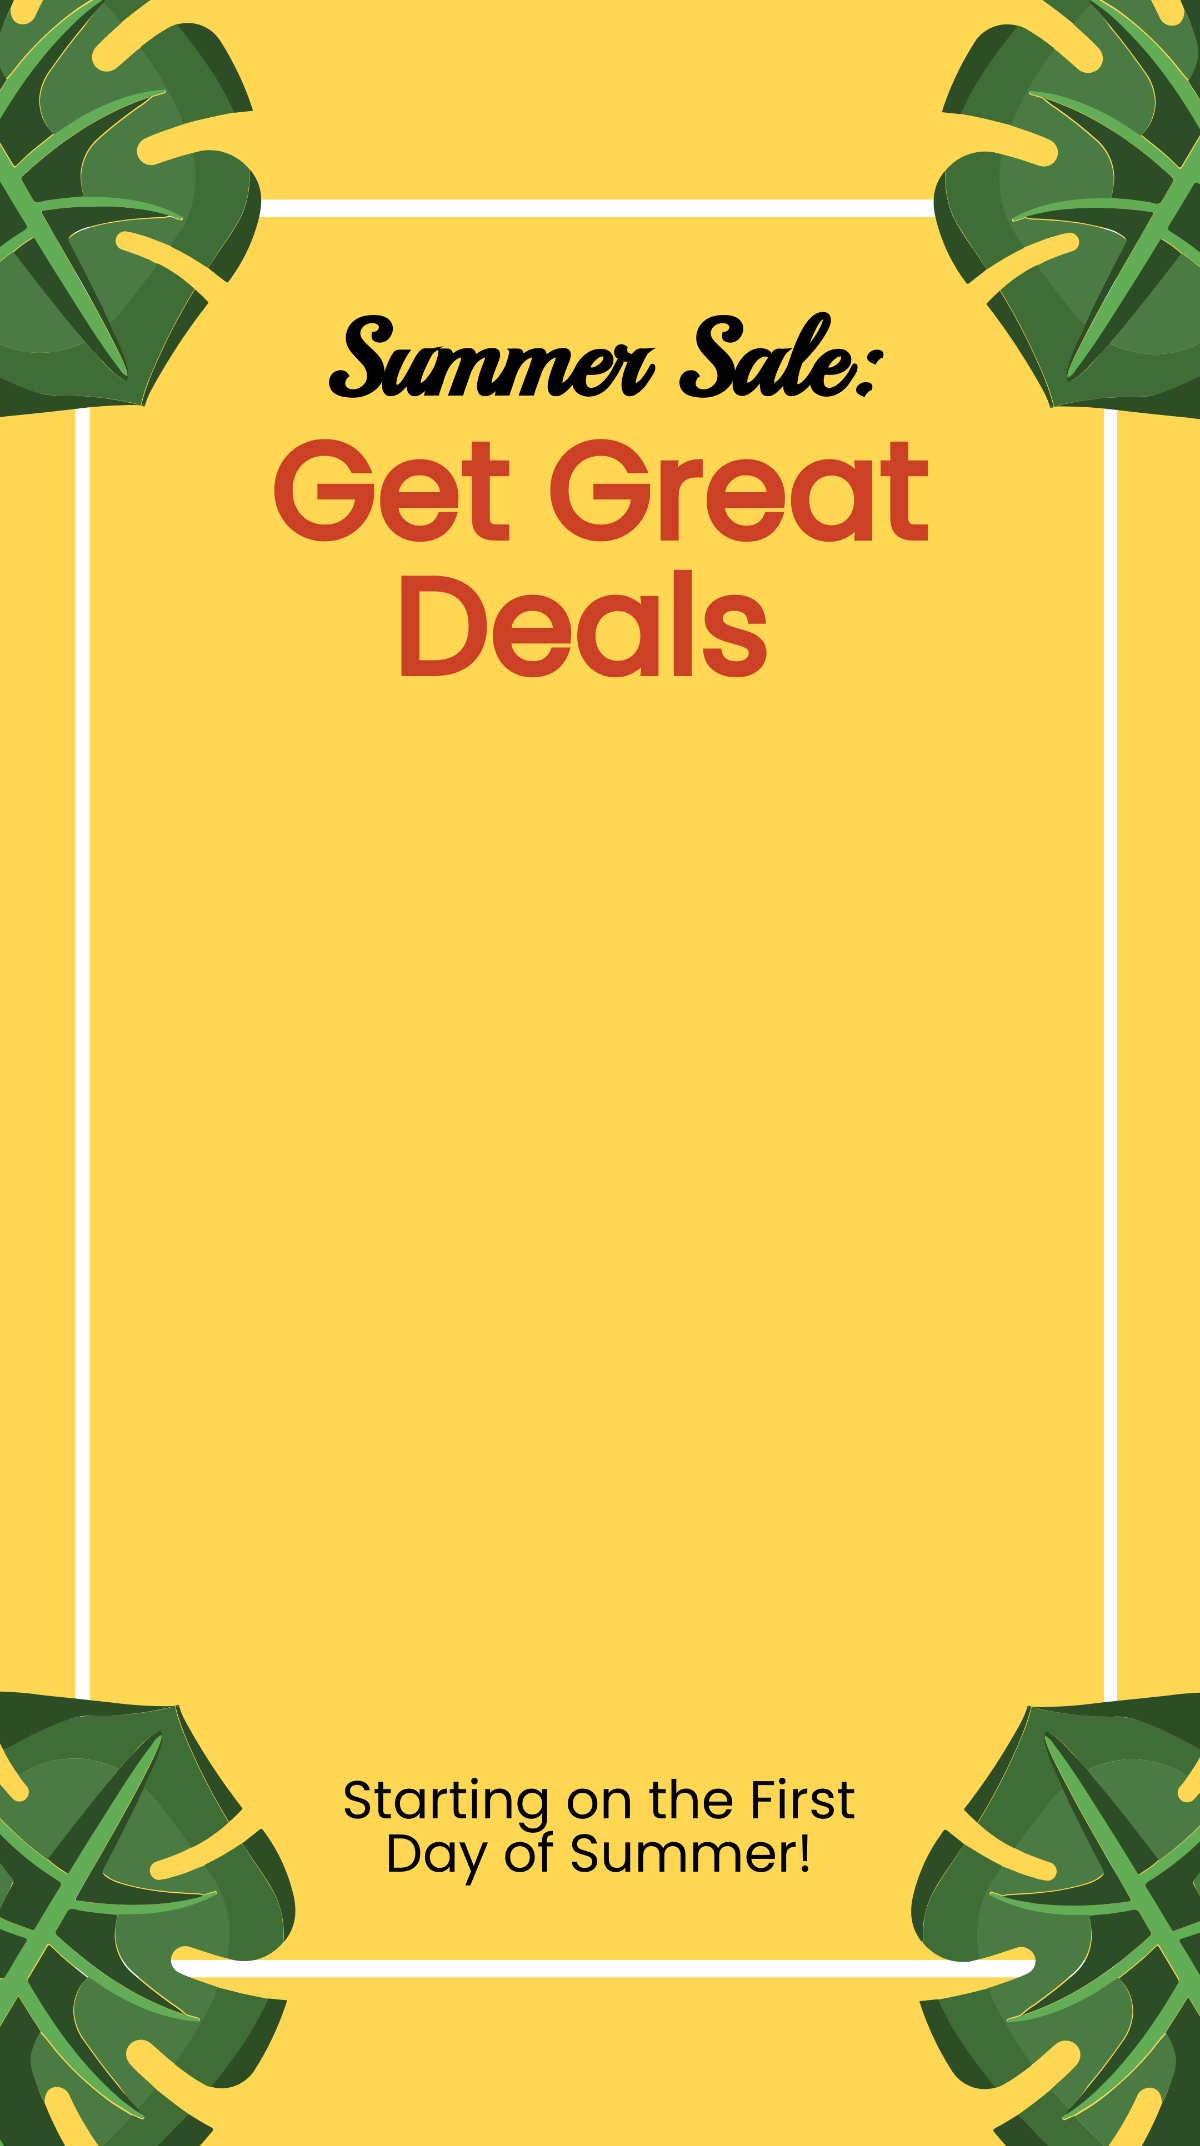 Free First Day of Summer Sale Snapchat Geofilter template